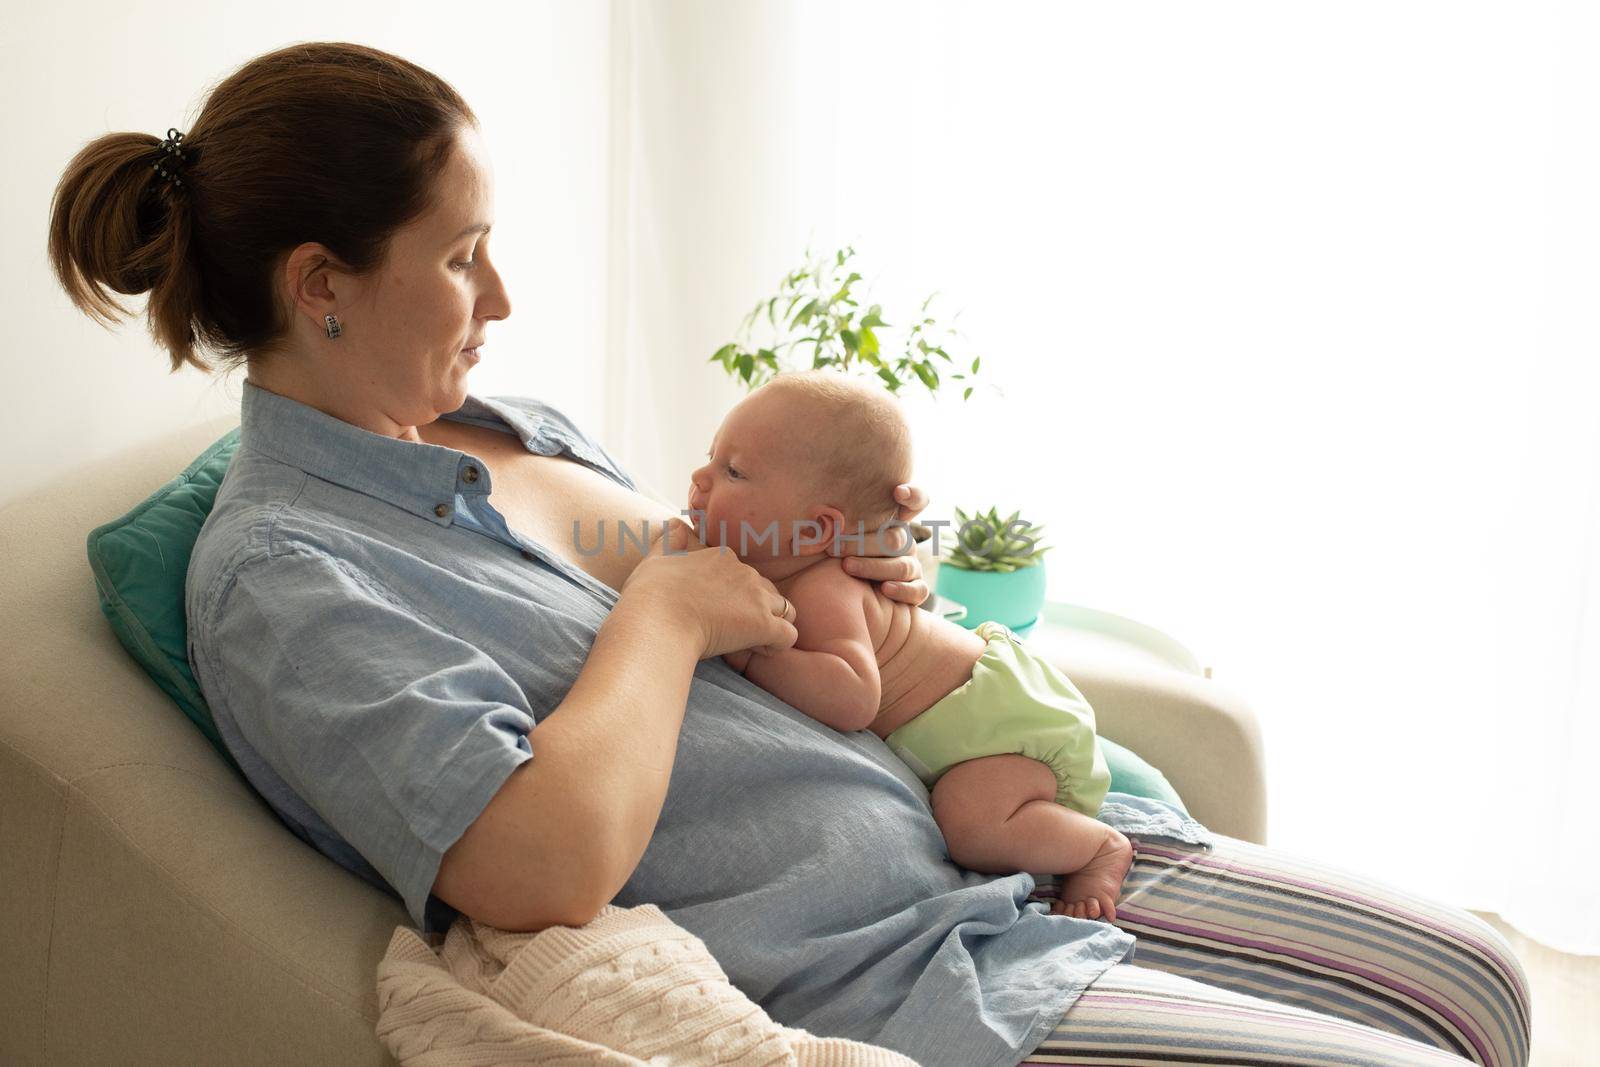 Breastfeeding in laid back position. Mothed and baby at the chair.